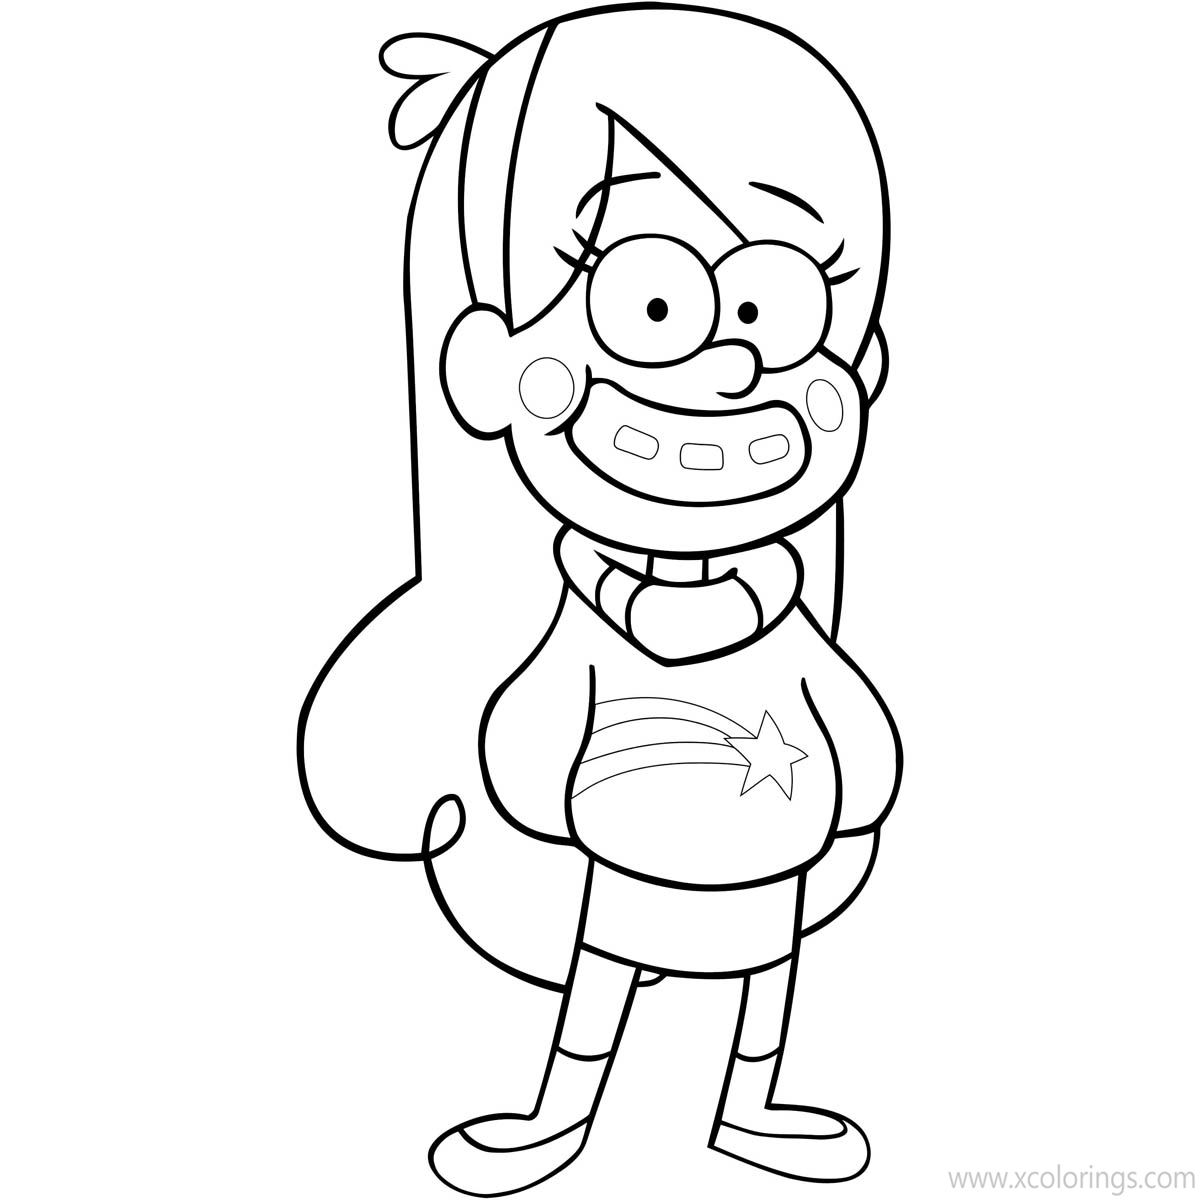 Free Gravity Falls Coloring Pages Mabel Pines printable